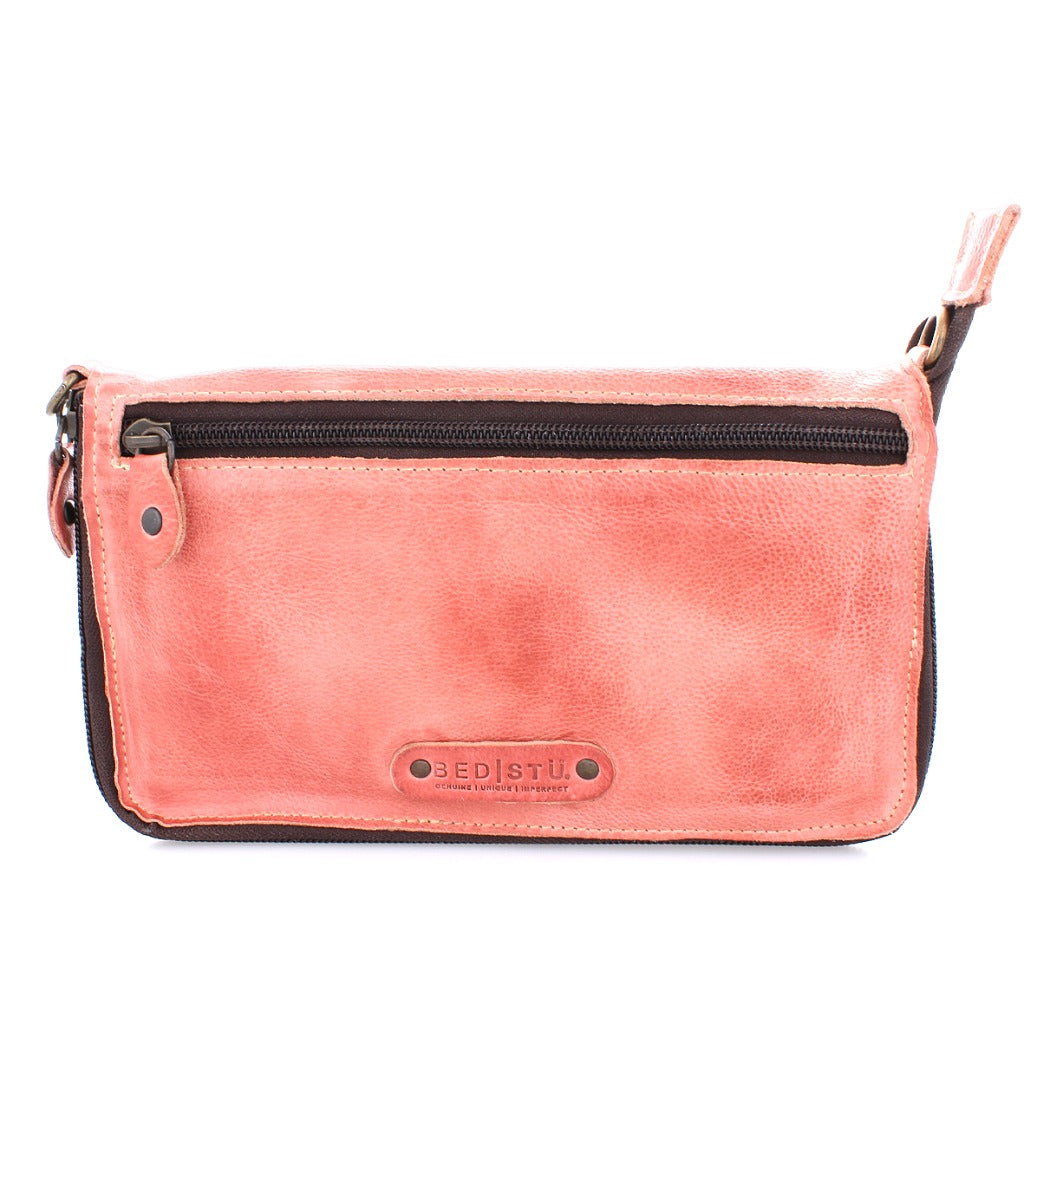 A Templeton II pink leather clutch with a zipper from Bed Stu.